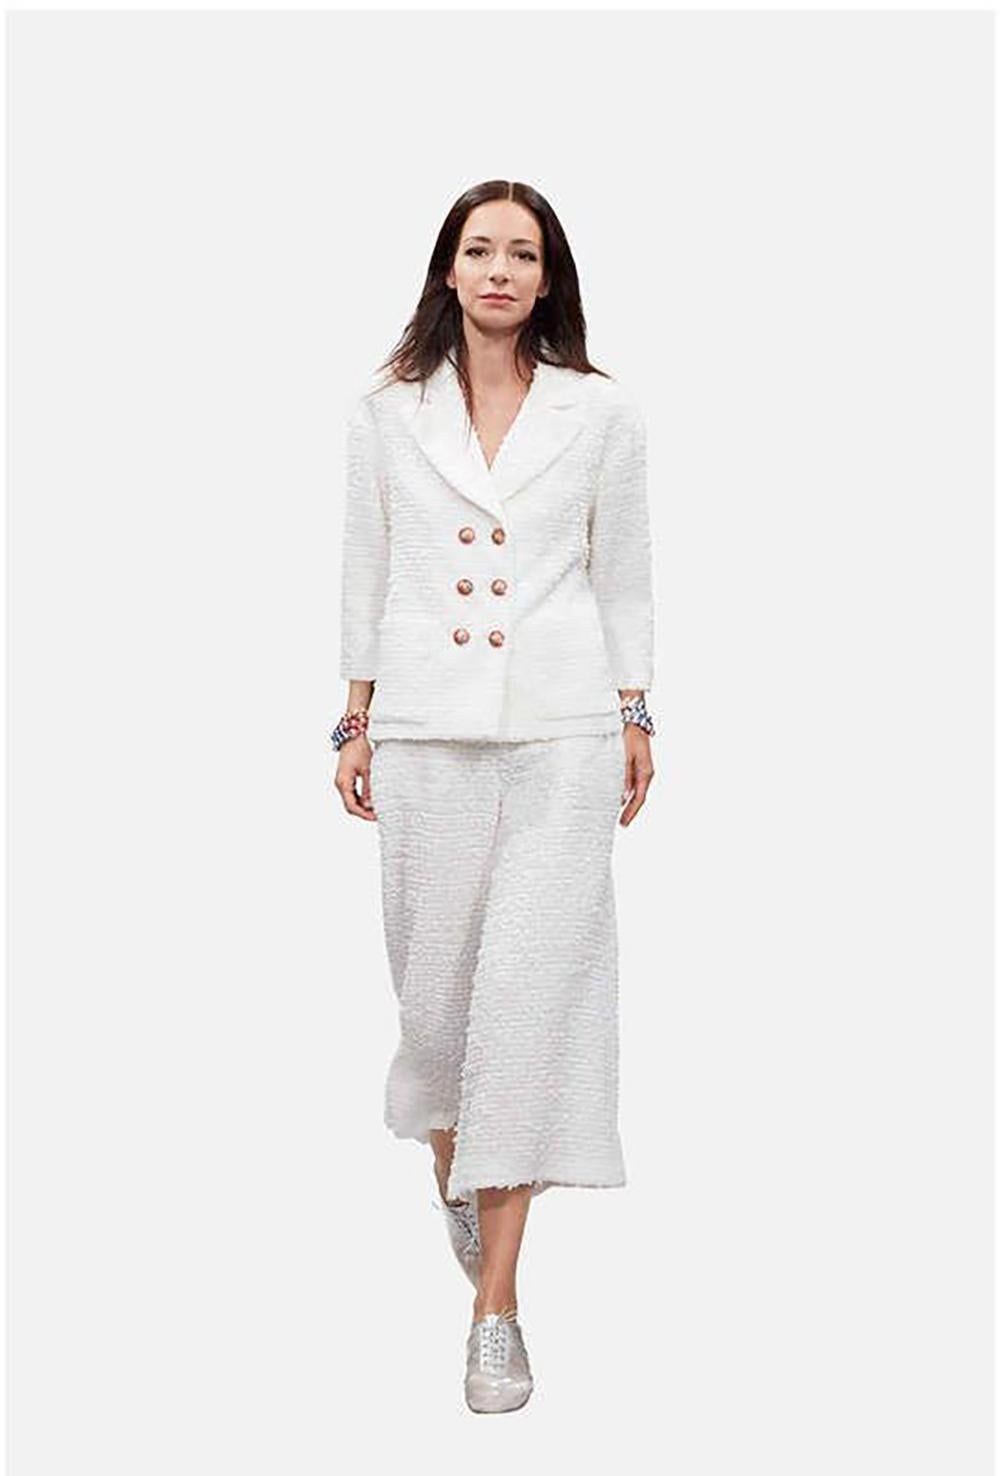 Women's or Men's Chanel Iconic CC Buttons Little White Jacket